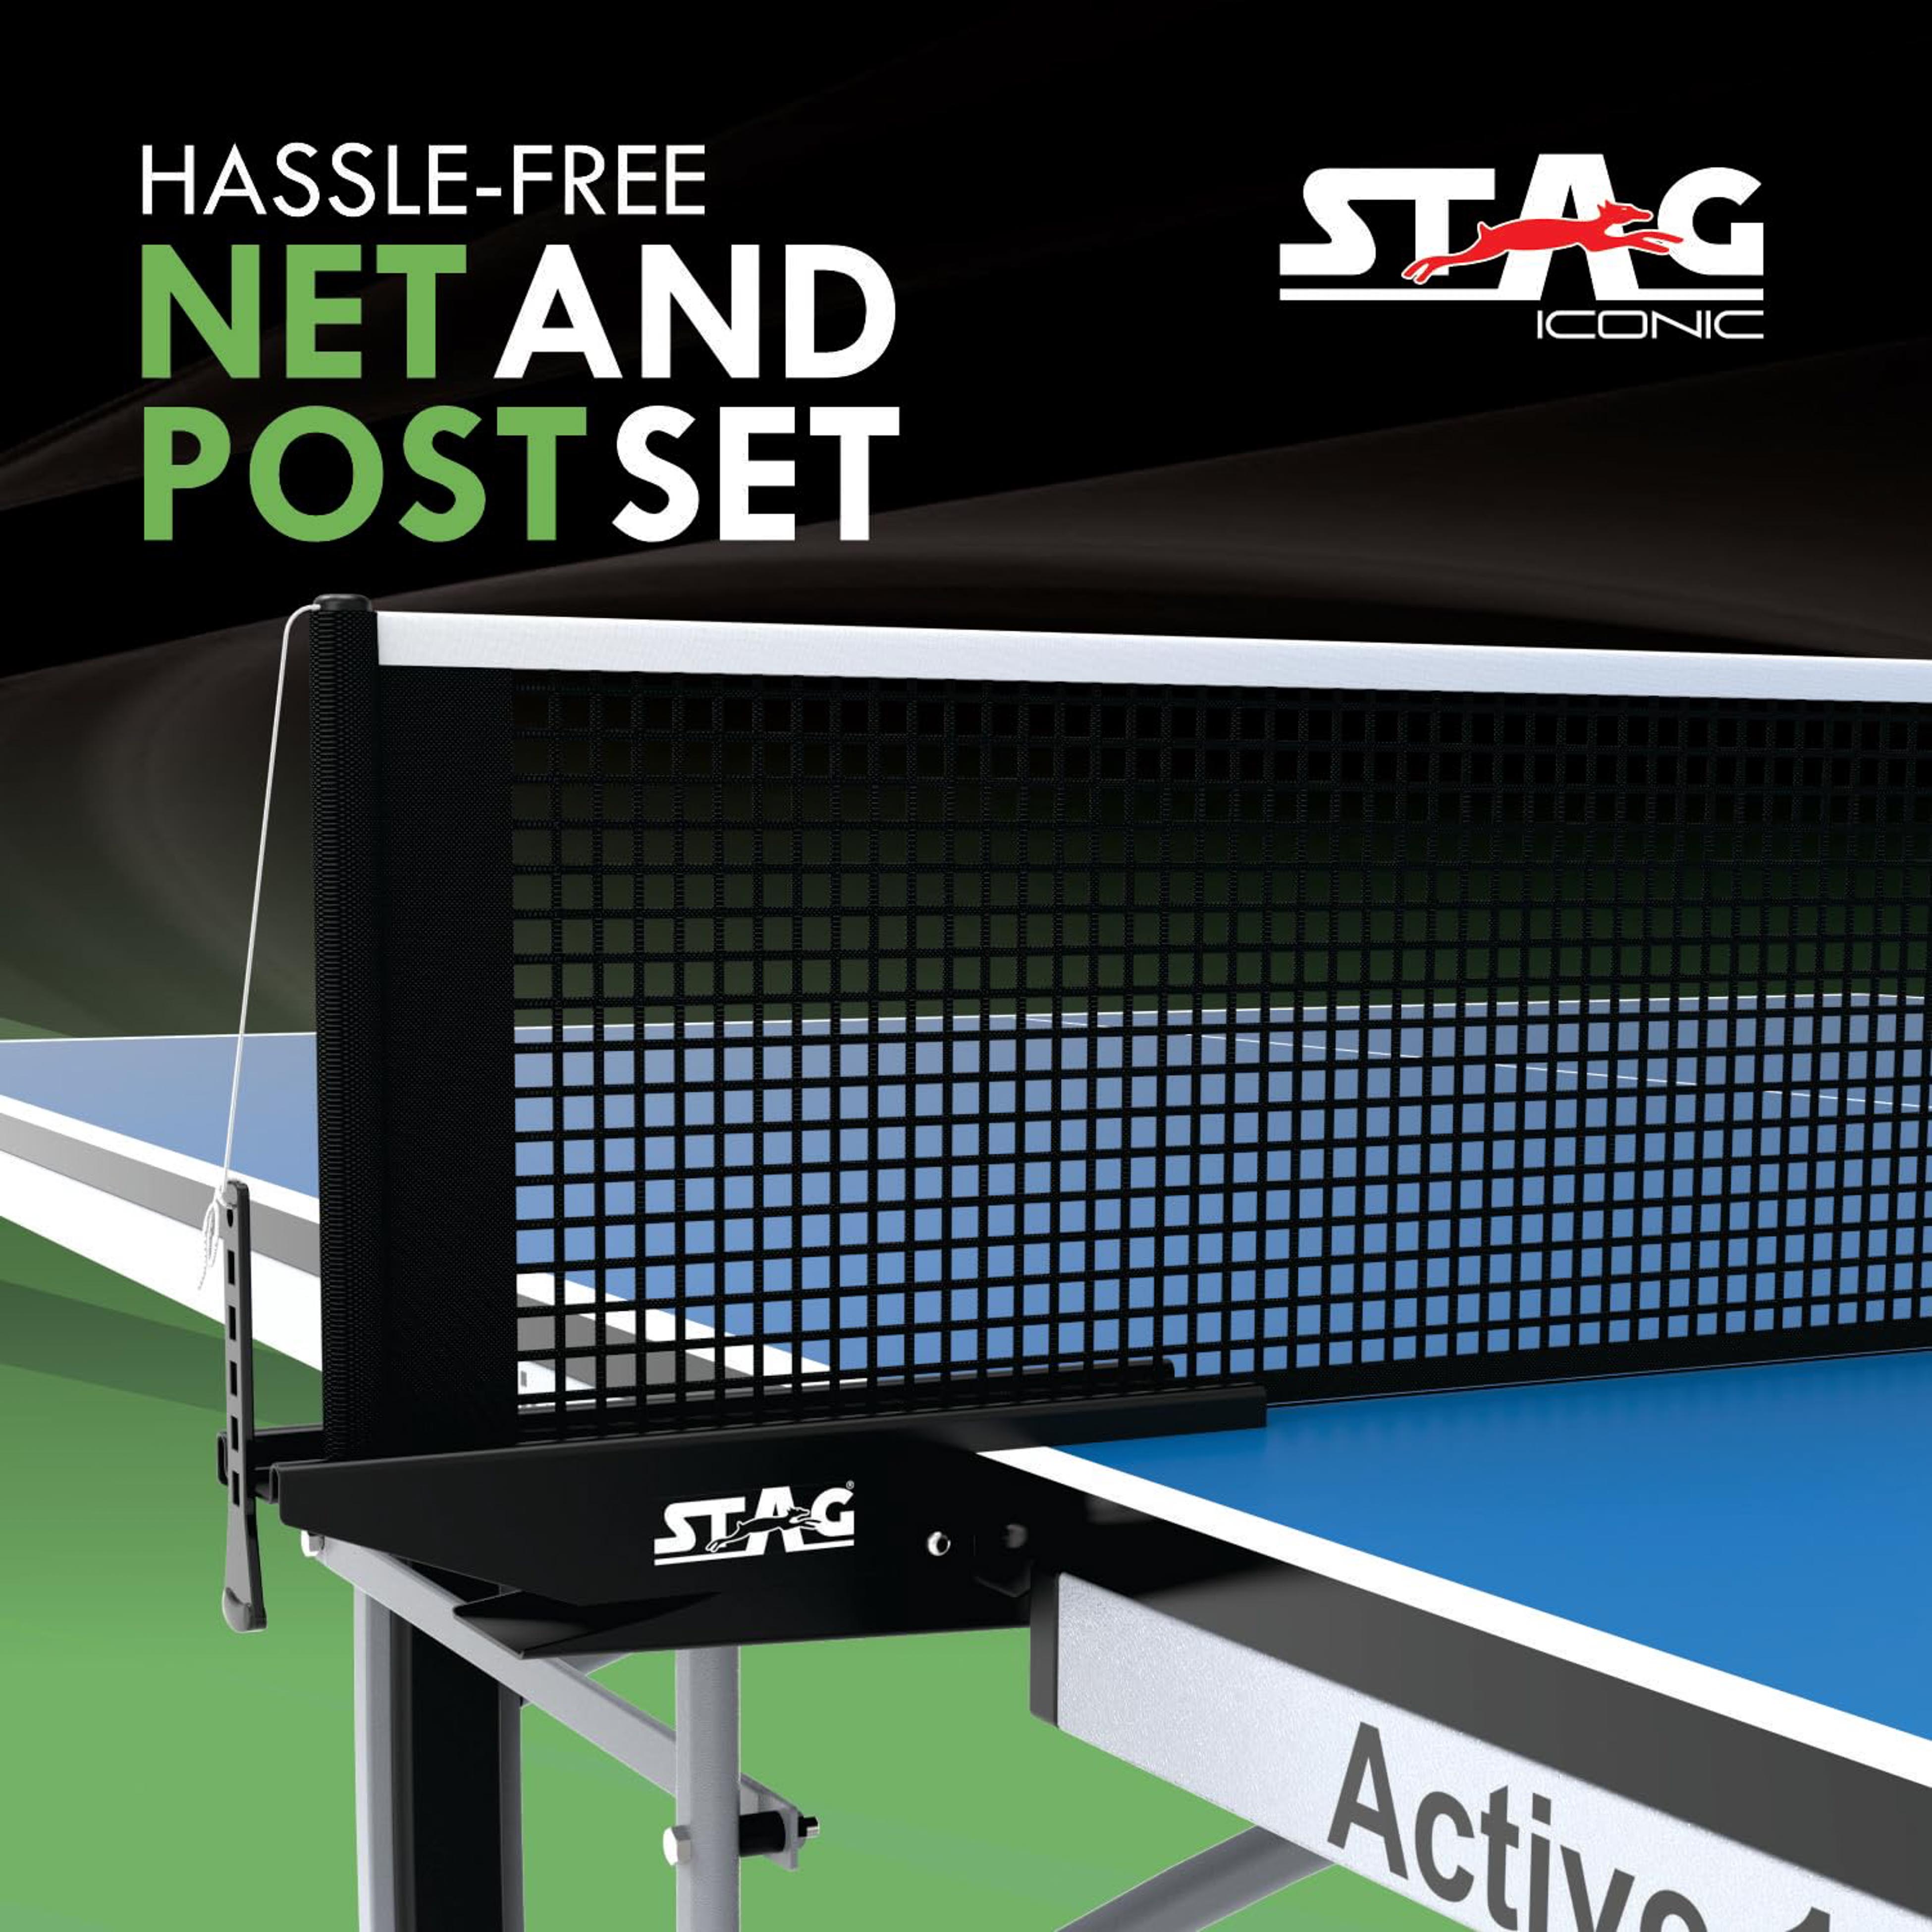 Stag Iconic Professional Grade Table Tennis Net & Post Set | Quick Easy Assembly with Spring Activated Clamp Net | Indoor & Outdoor Compatible Ping Pong Table Net Post - (Alloy Steel)